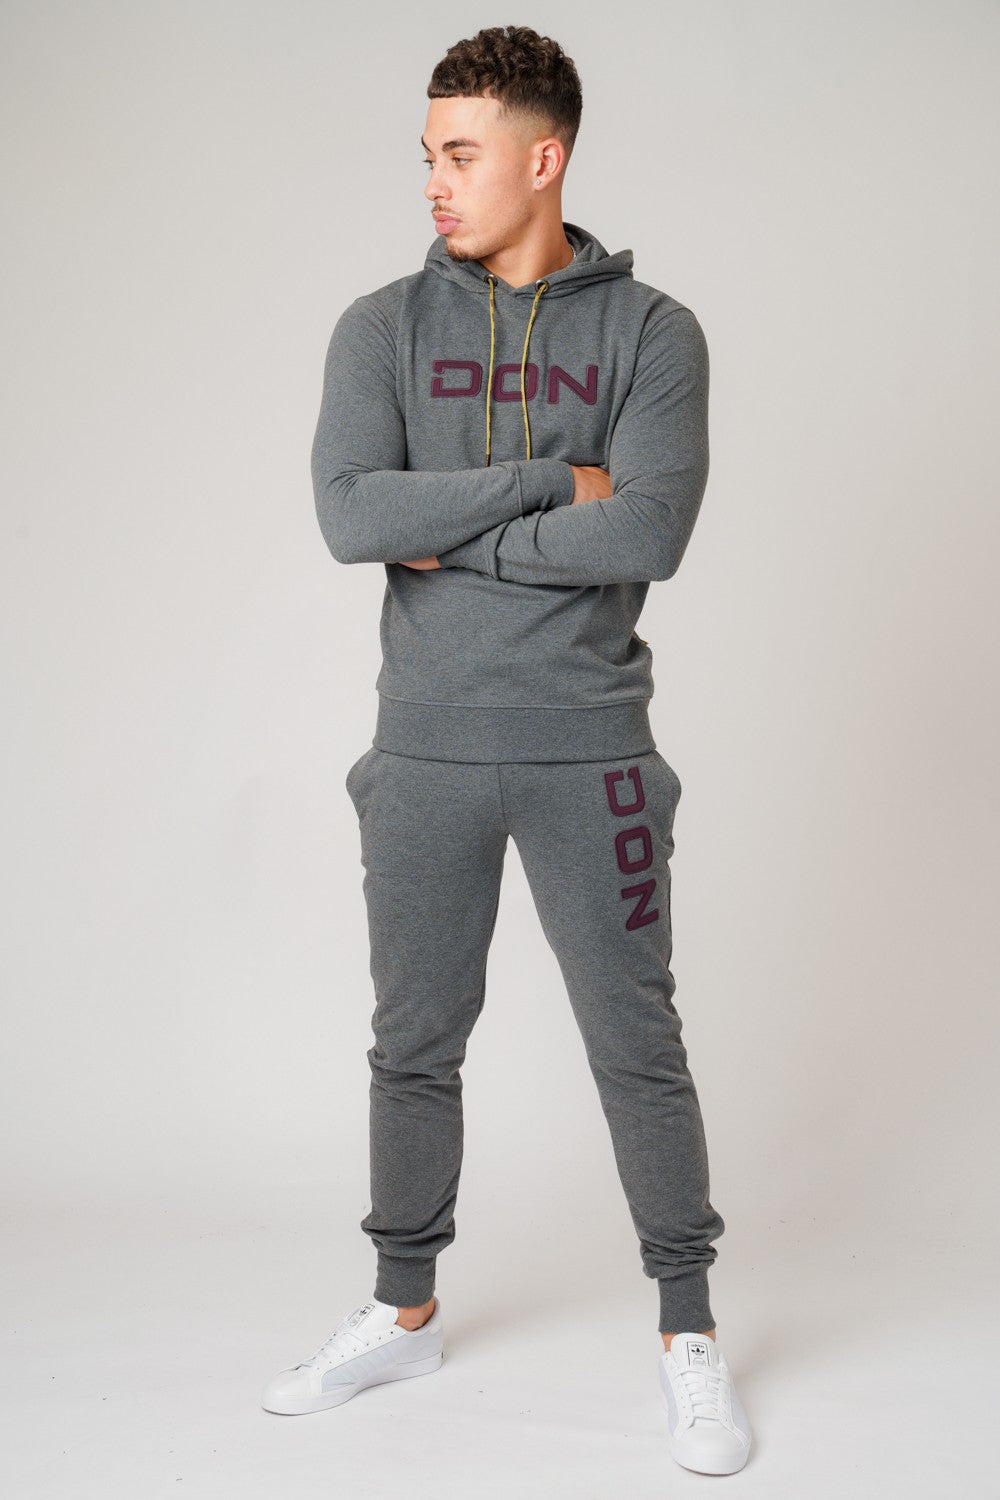 DON APPLIQUE GREY MARL HOODIE - Don Jeans